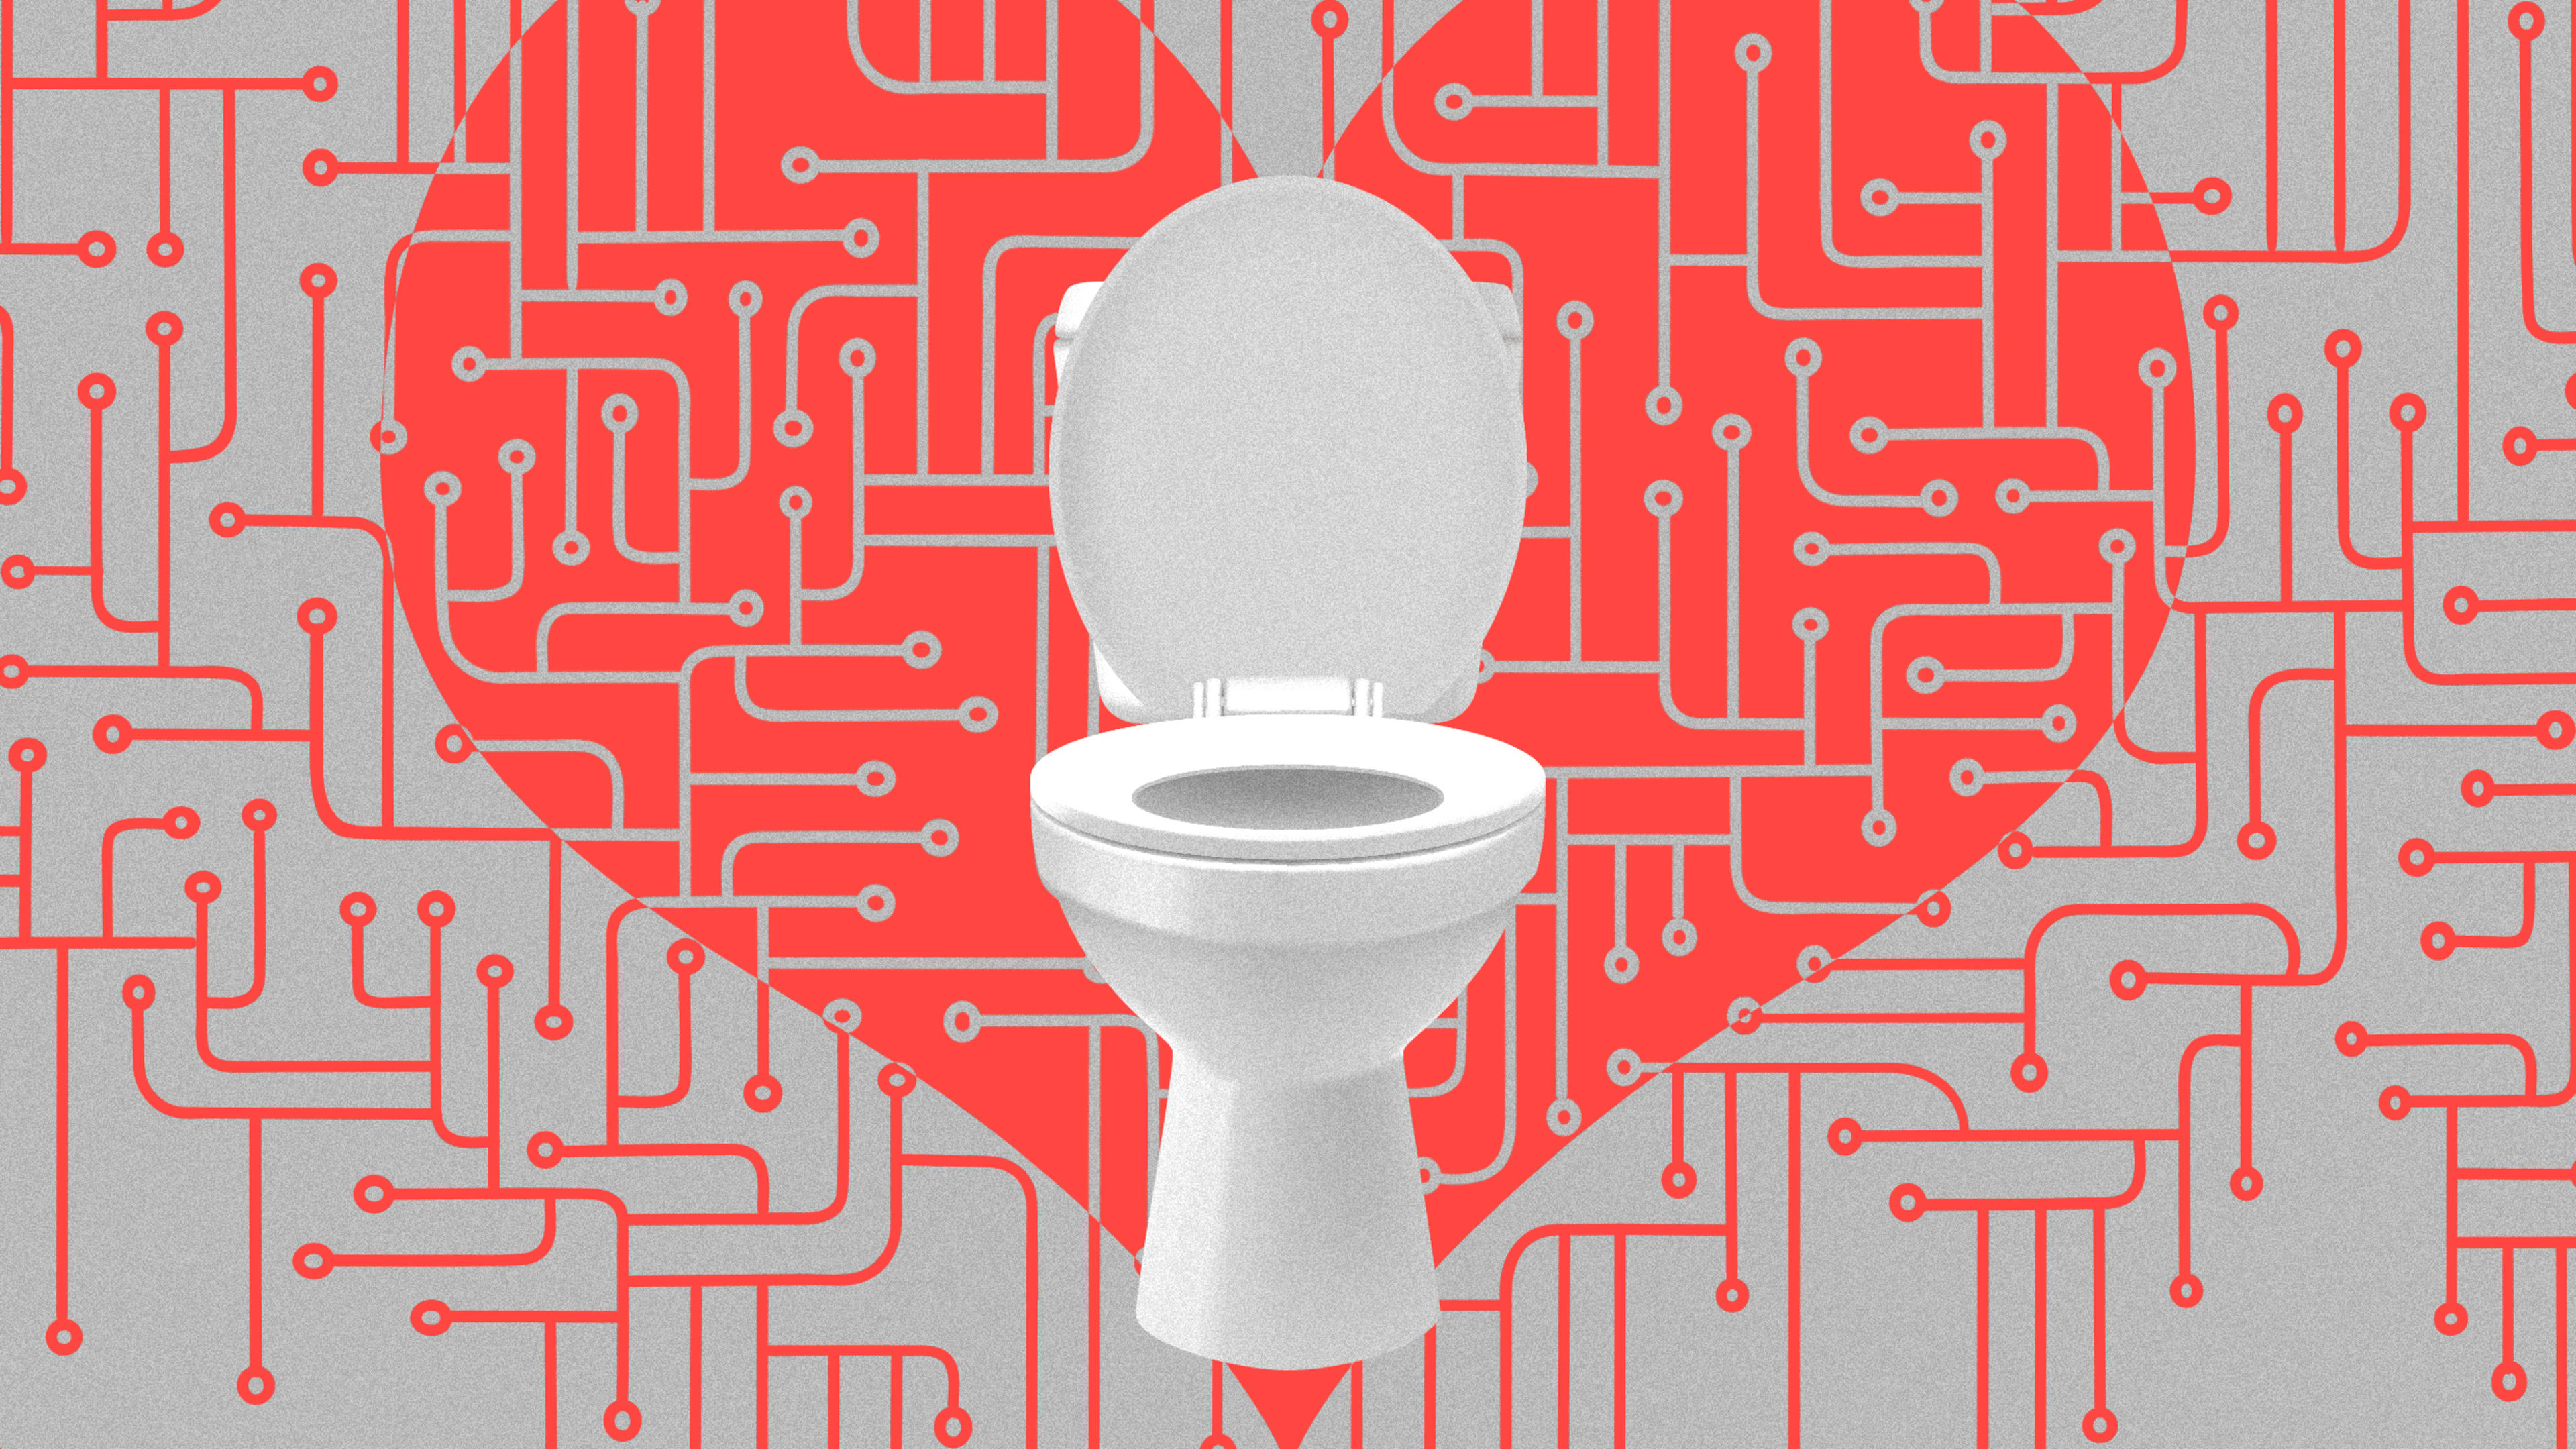 This smart toilet seat monitors your heart health through your gluteus maximus